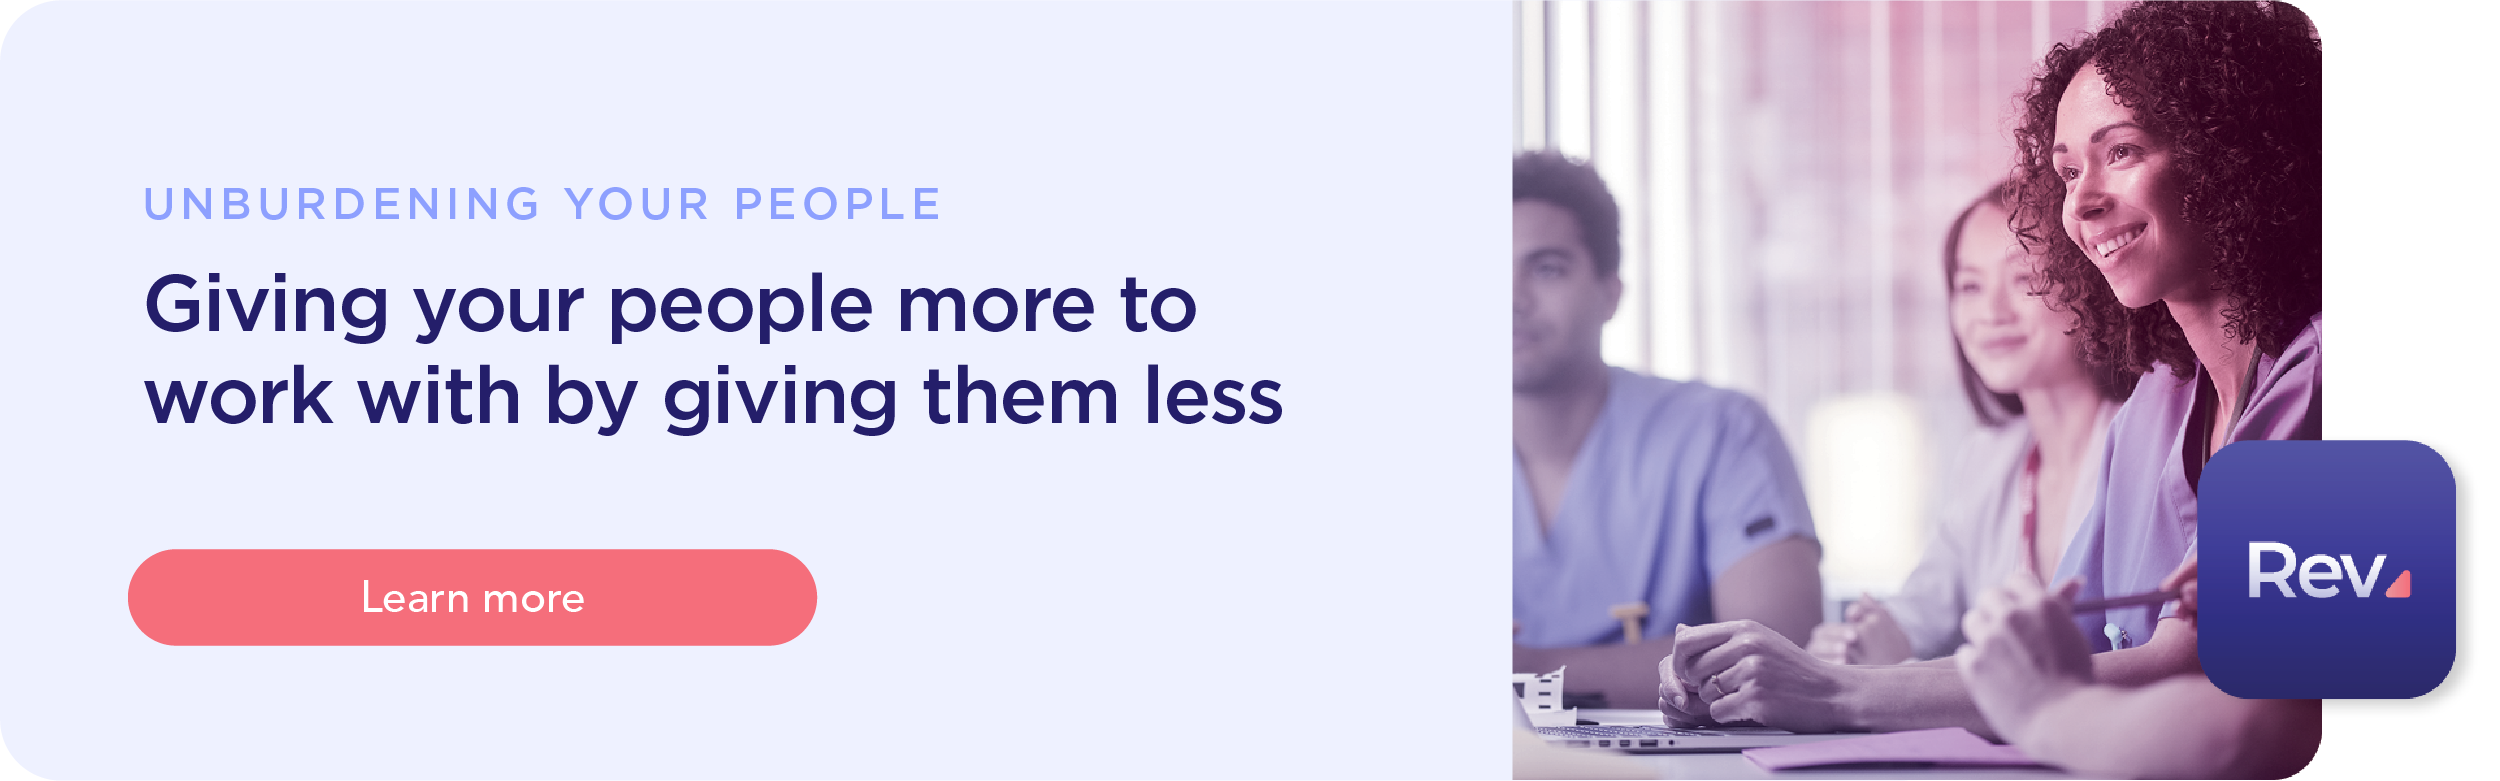 Giving your people more to work with by giving them less. Learn more at our unburdening your people landing page.